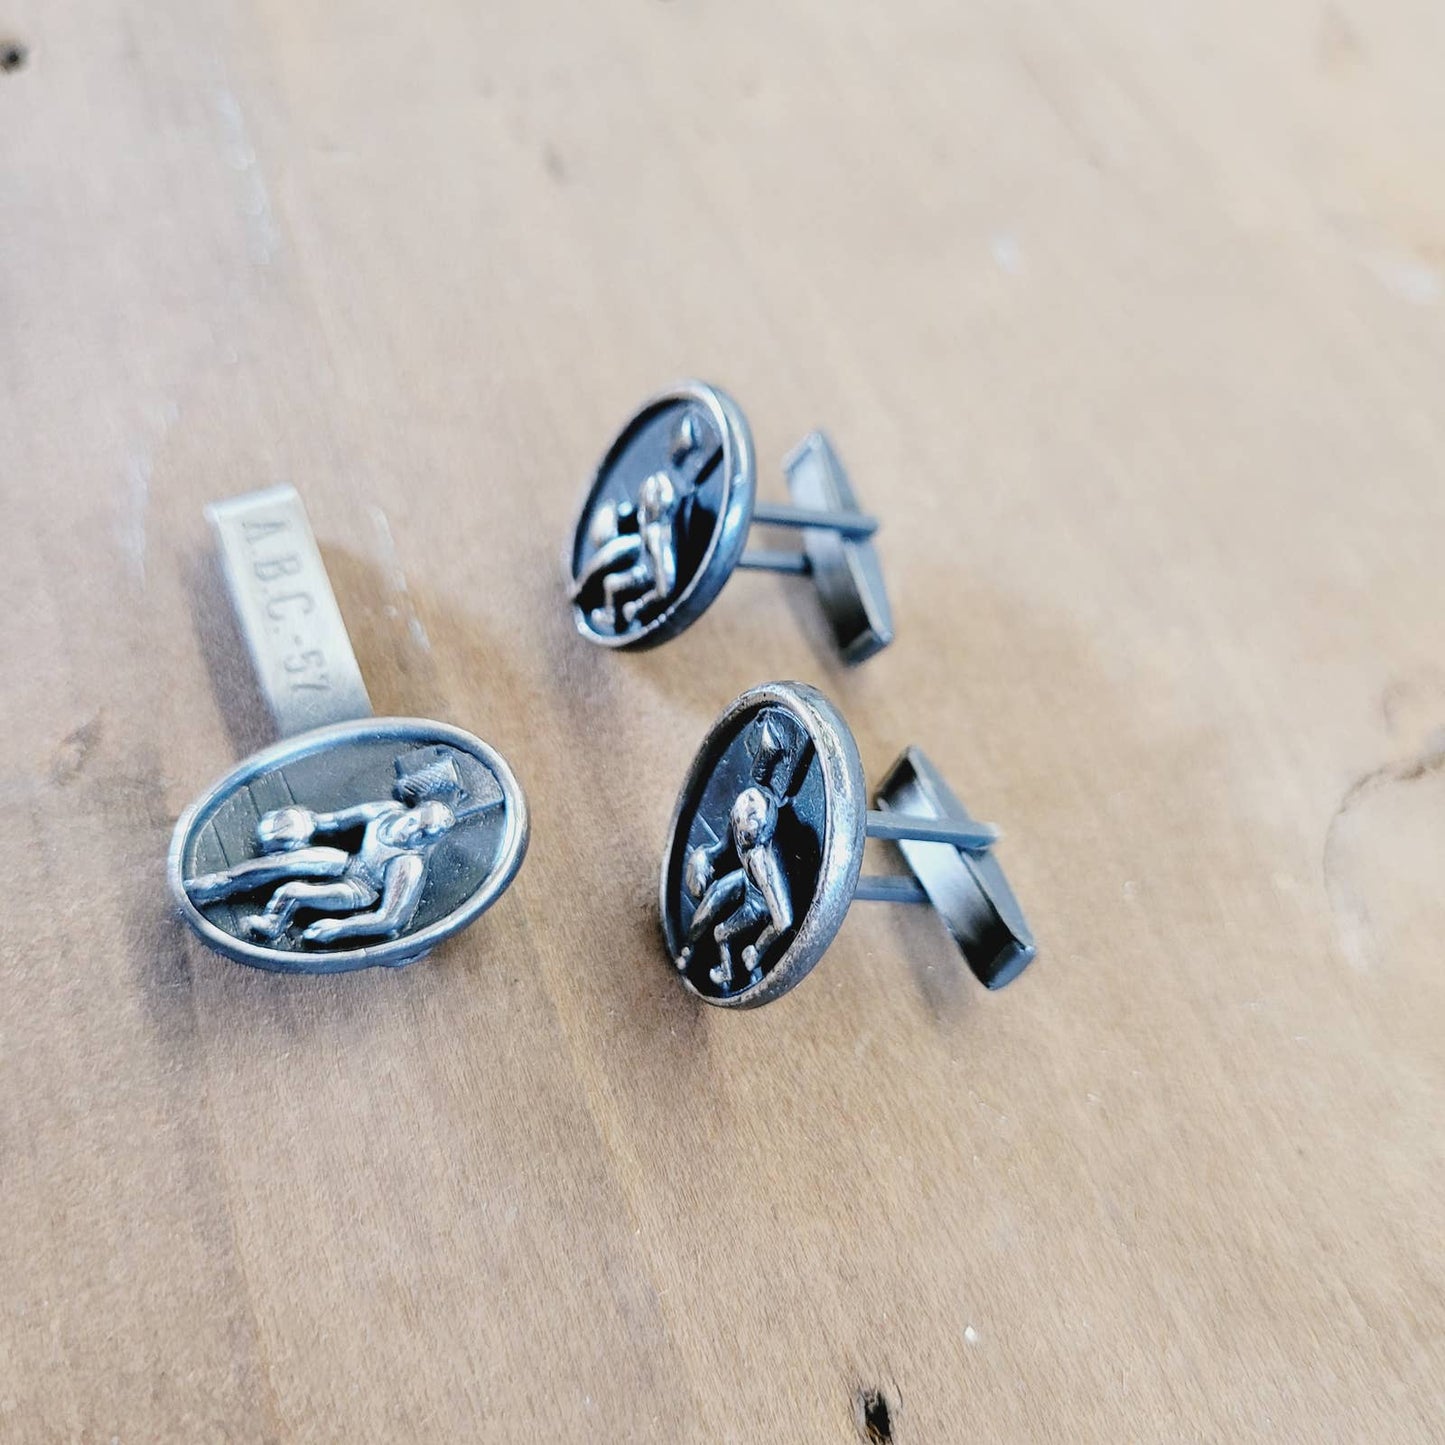 1950s Vintage Basketball Cufflinks and Tie Clip